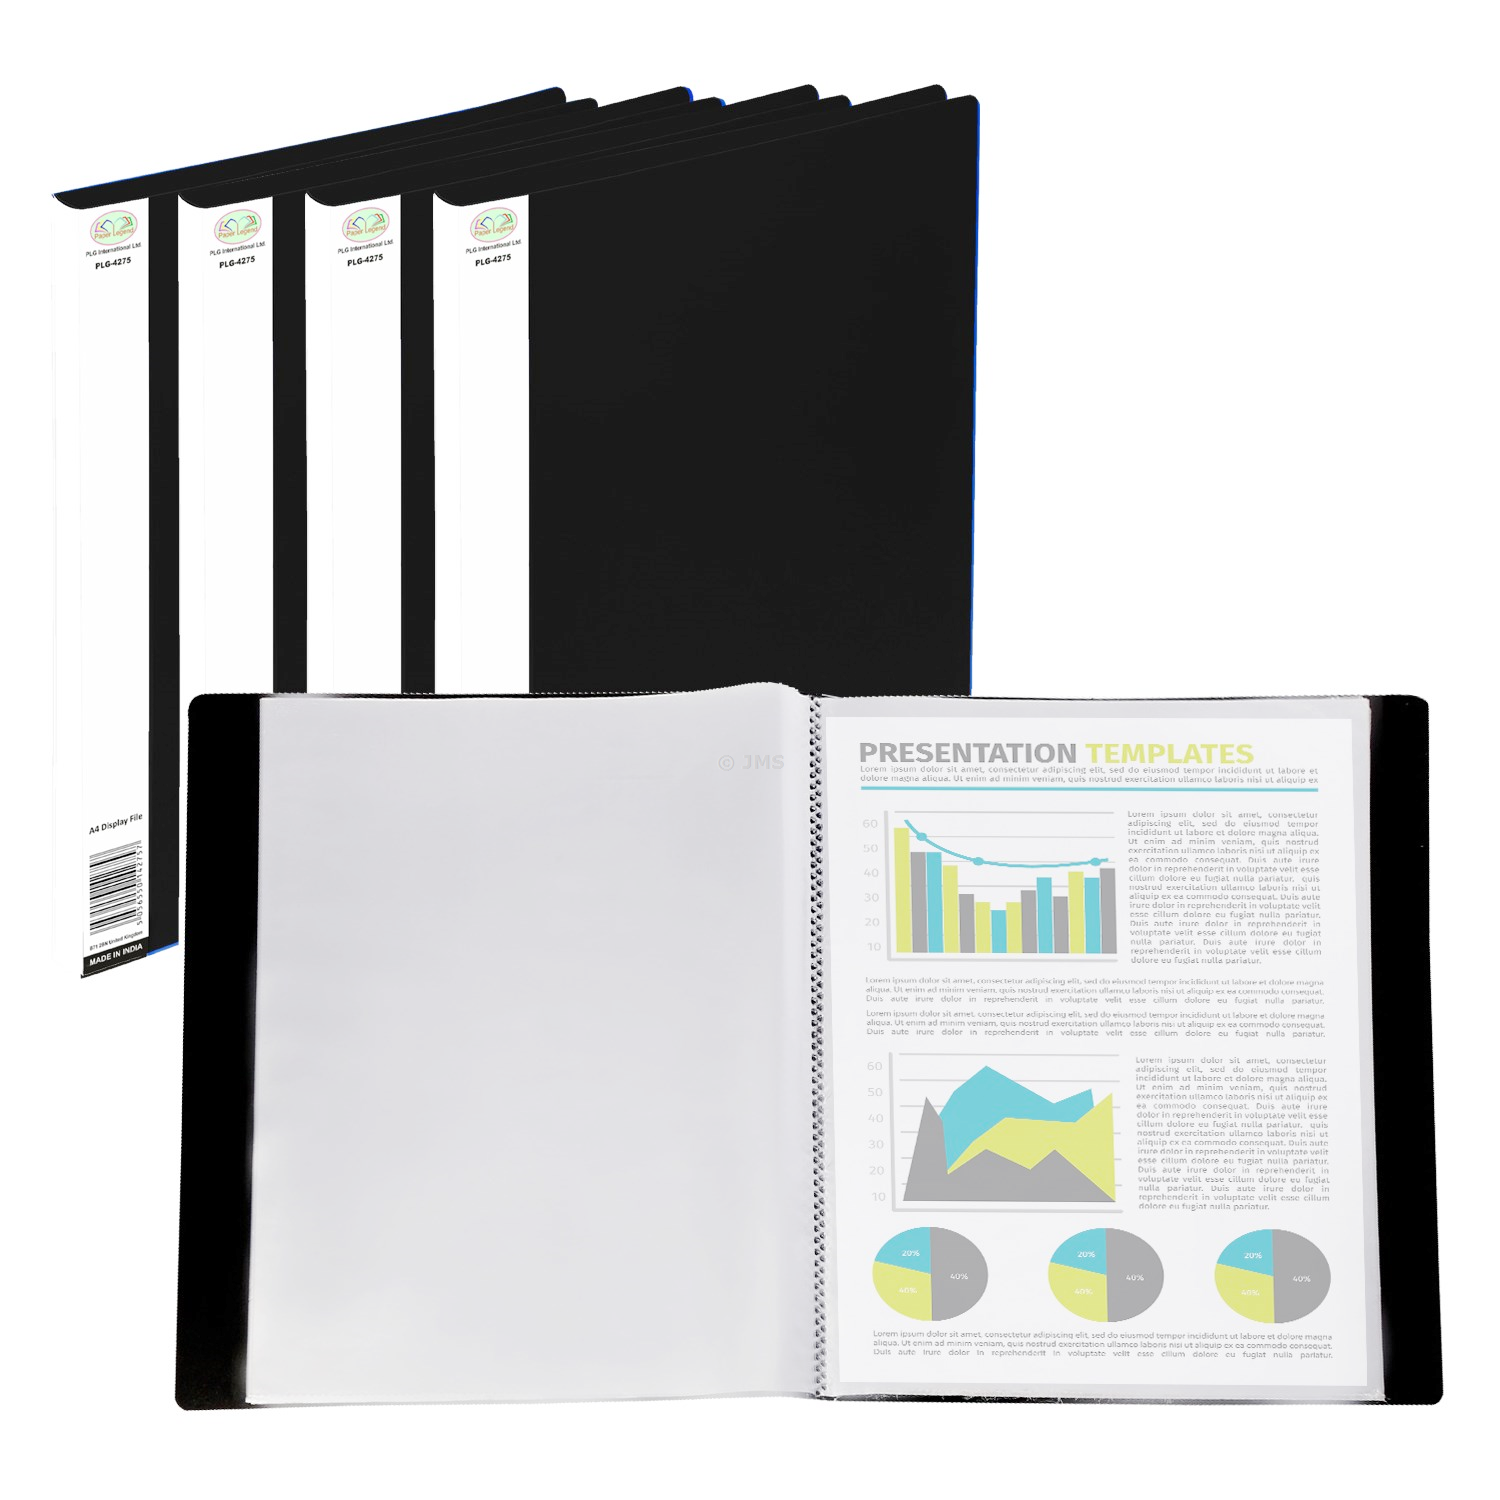 5 Pack A4 Display Folders, 20 Pockets (40 View Page) Display Book Clear Plastic Pockets Solid Polypropylene Portfolio Presentation Book Project Folder Flexible Black Cover for Brochures Reports Certificates